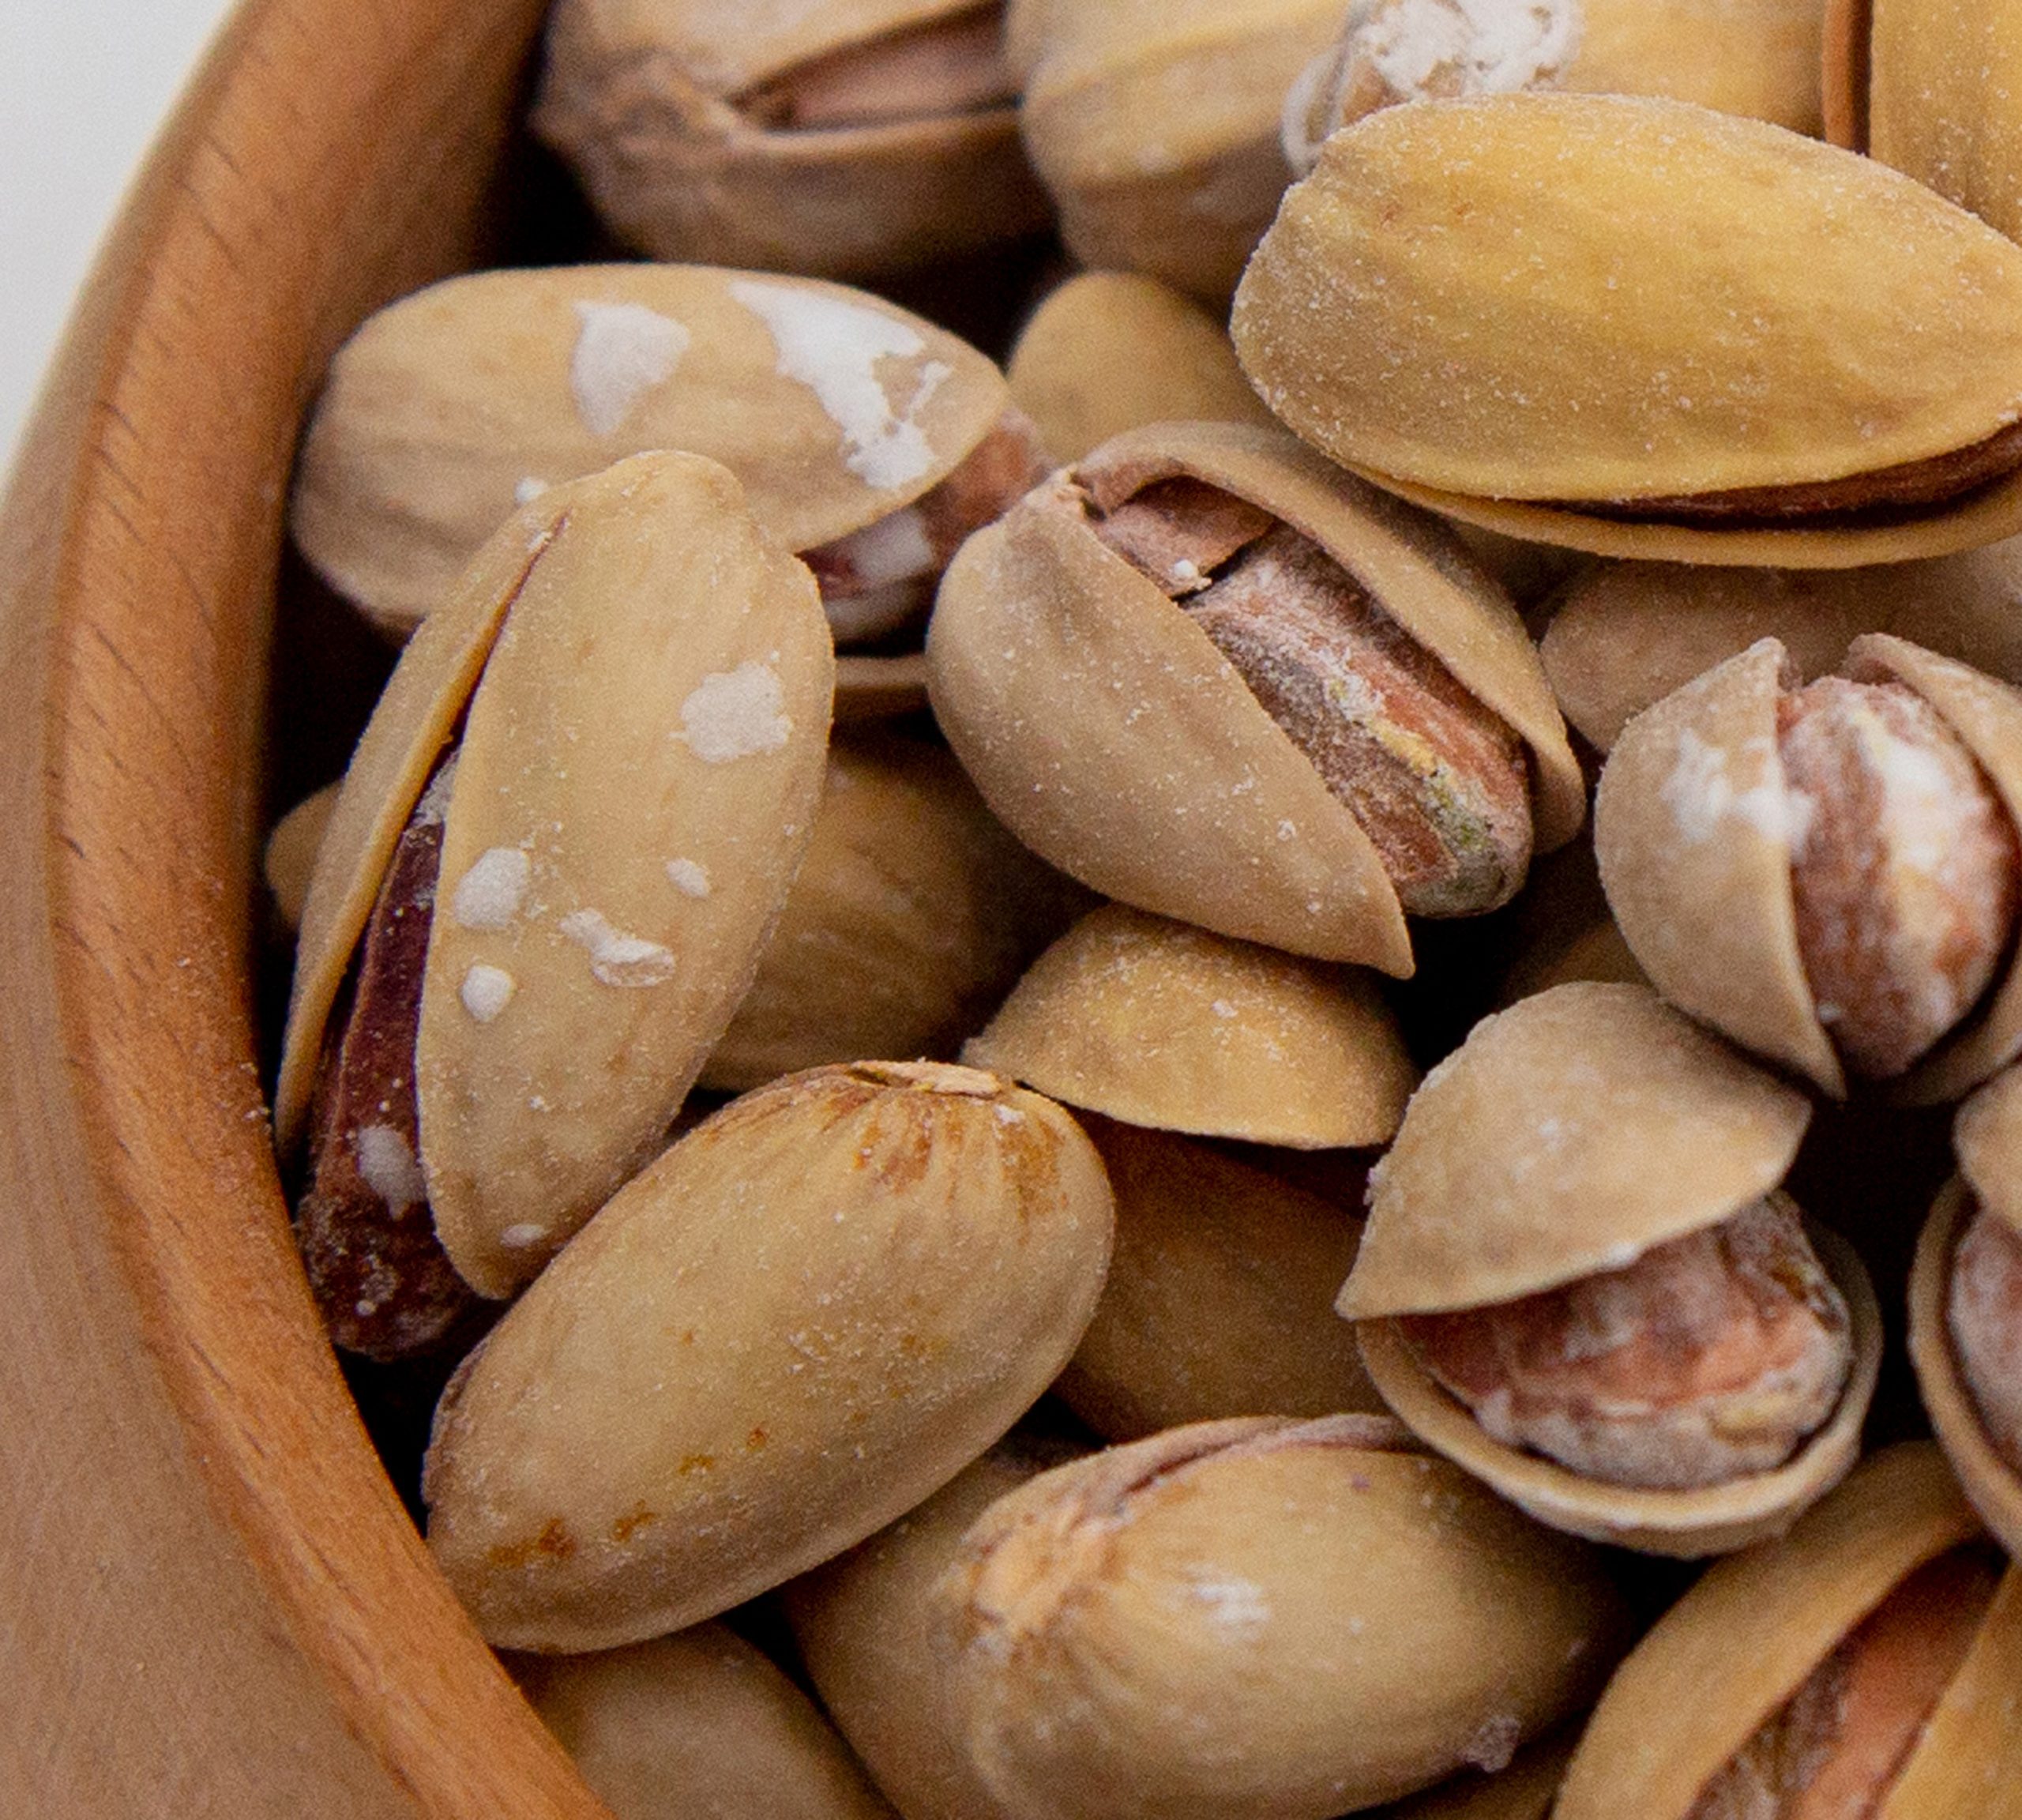 Nutex Pistachios - Roasted and Salted Nuts Suppliers